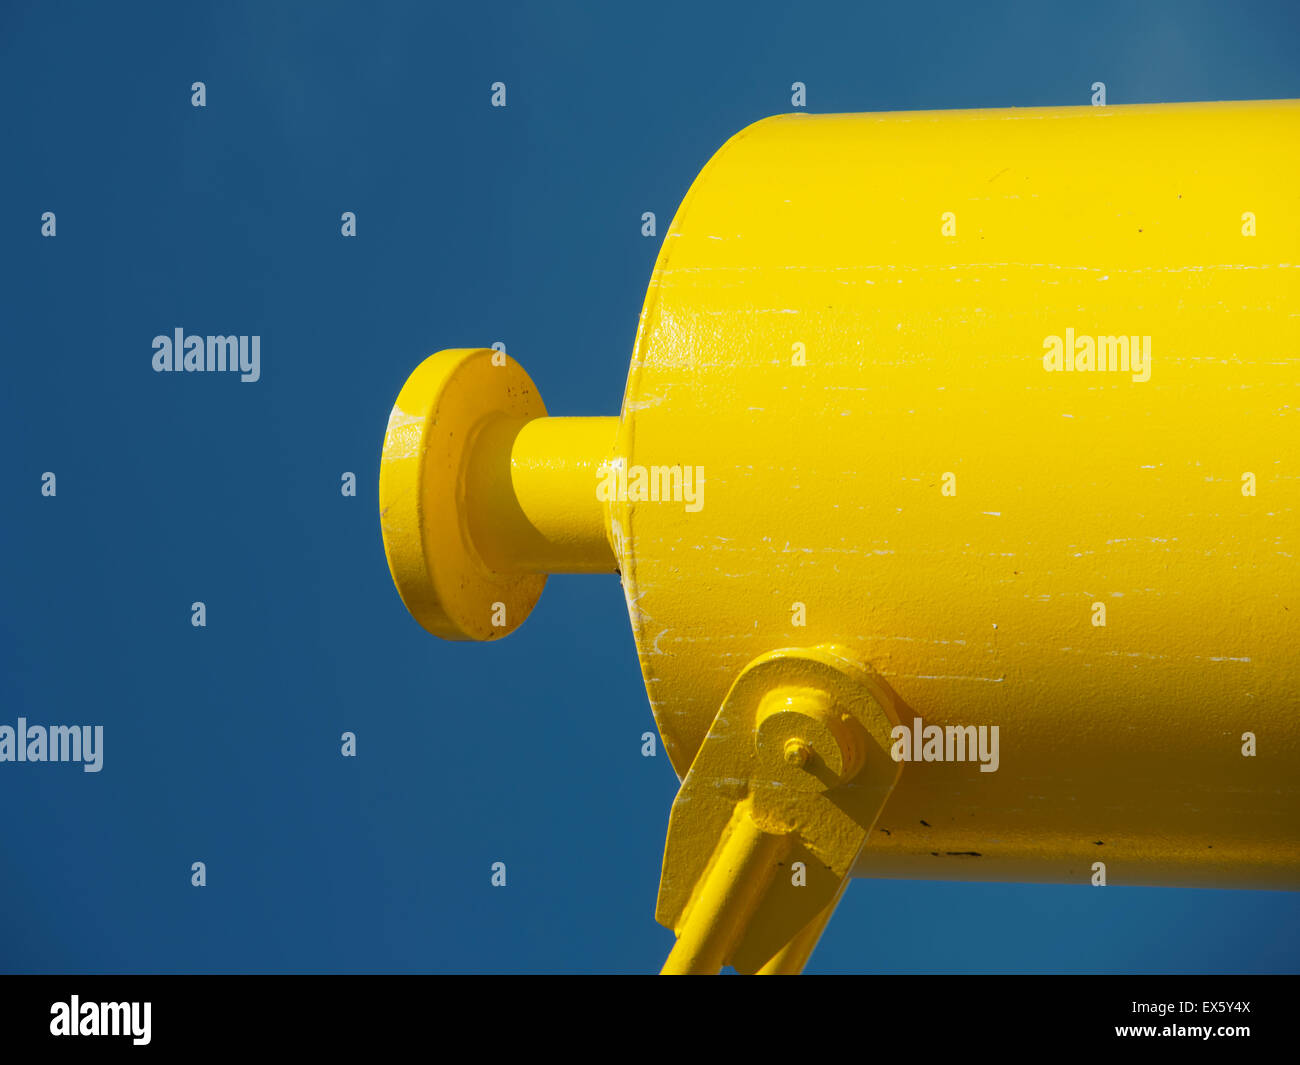 Download Yellow Object High Resolution Stock Photography And Images Alamy Yellowimages Mockups